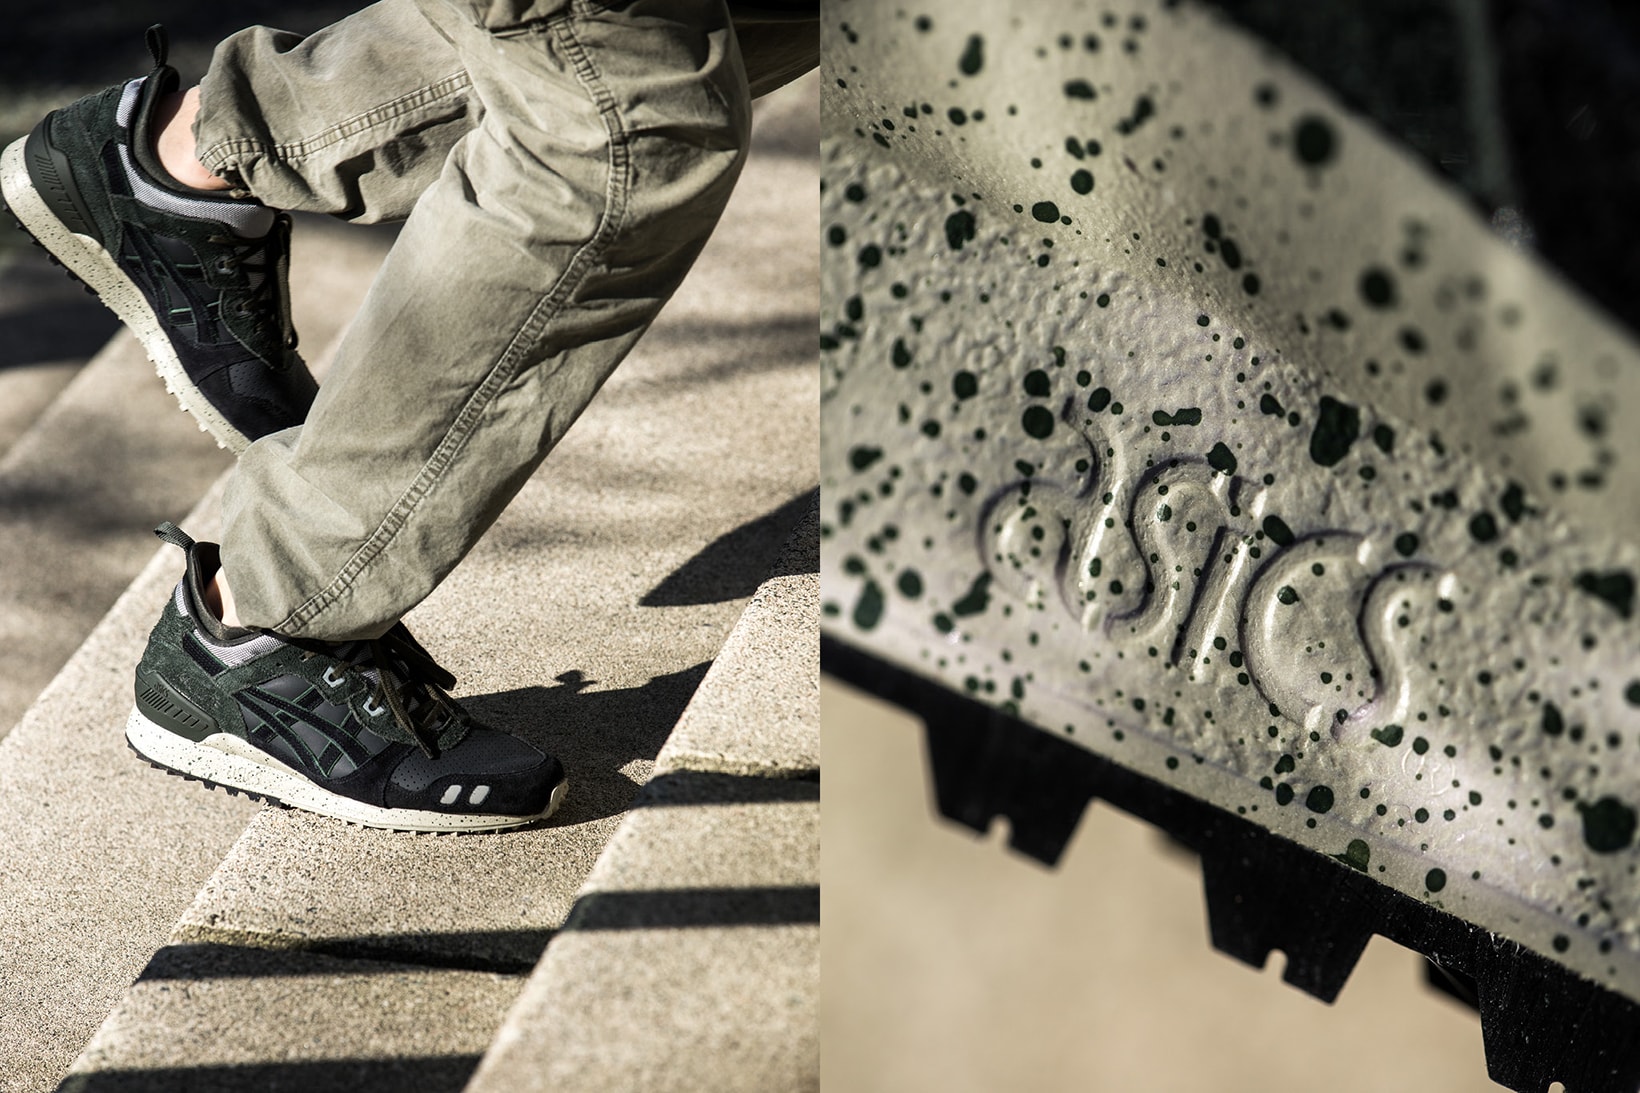 HAVEN ASICS GEL Lyte III MT mid top collaboration 2018 february 17 release date info sneakers shoes footwear canada